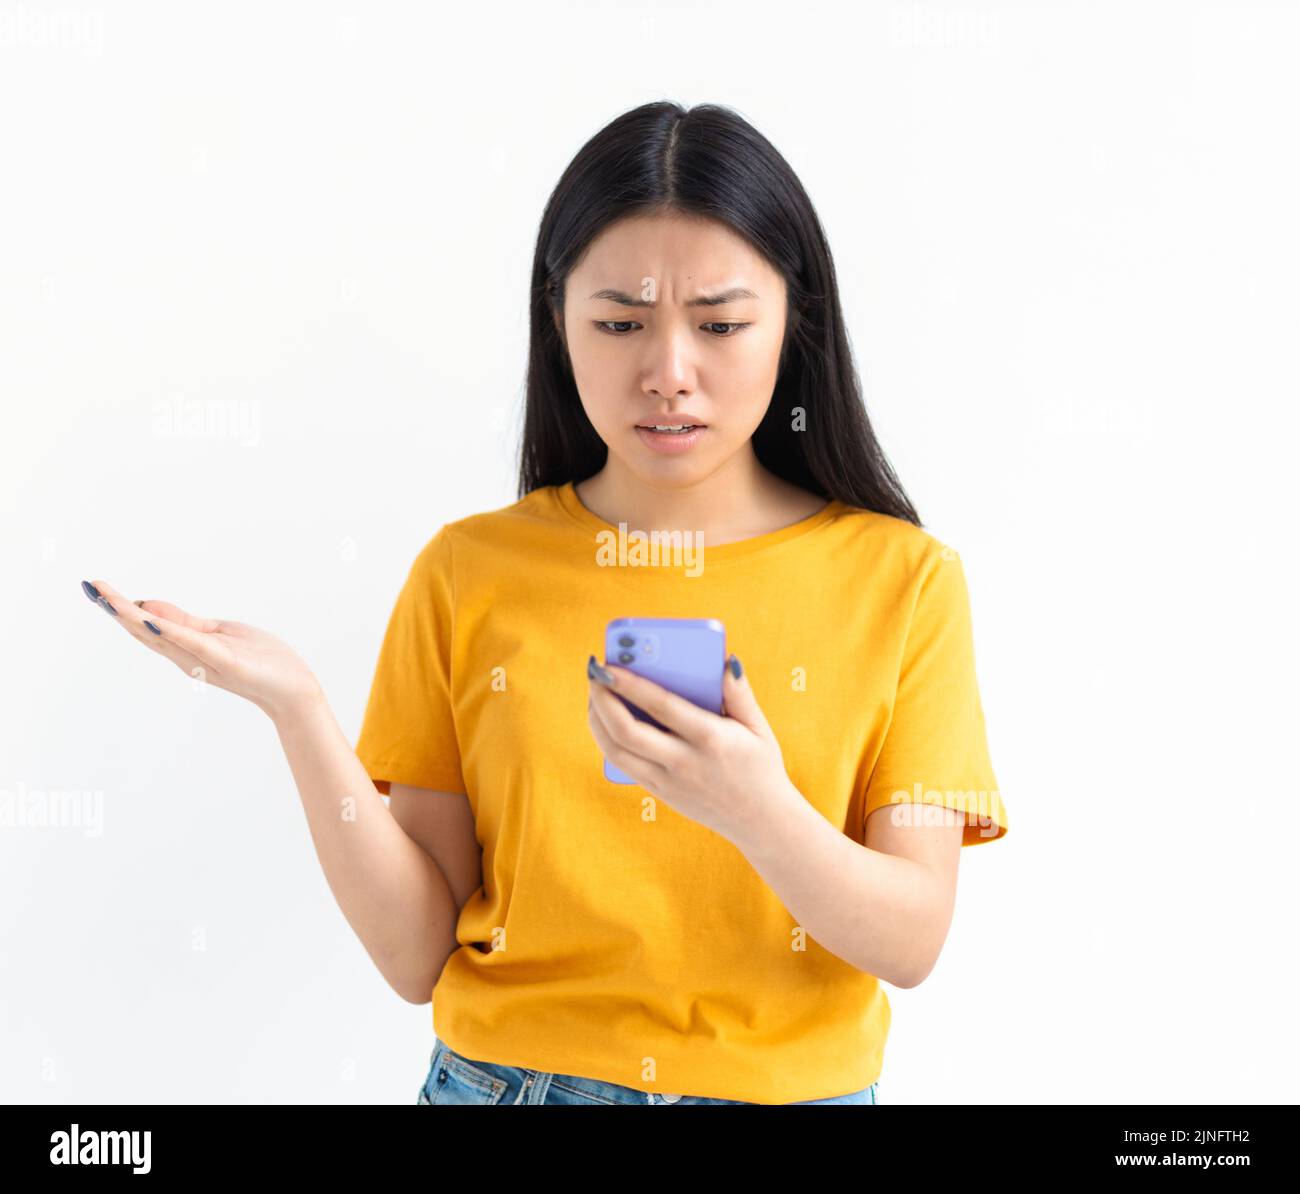 Young woman freelancer looking worried at mobile phone reading bad news on email loss trouble concept Stock Photo